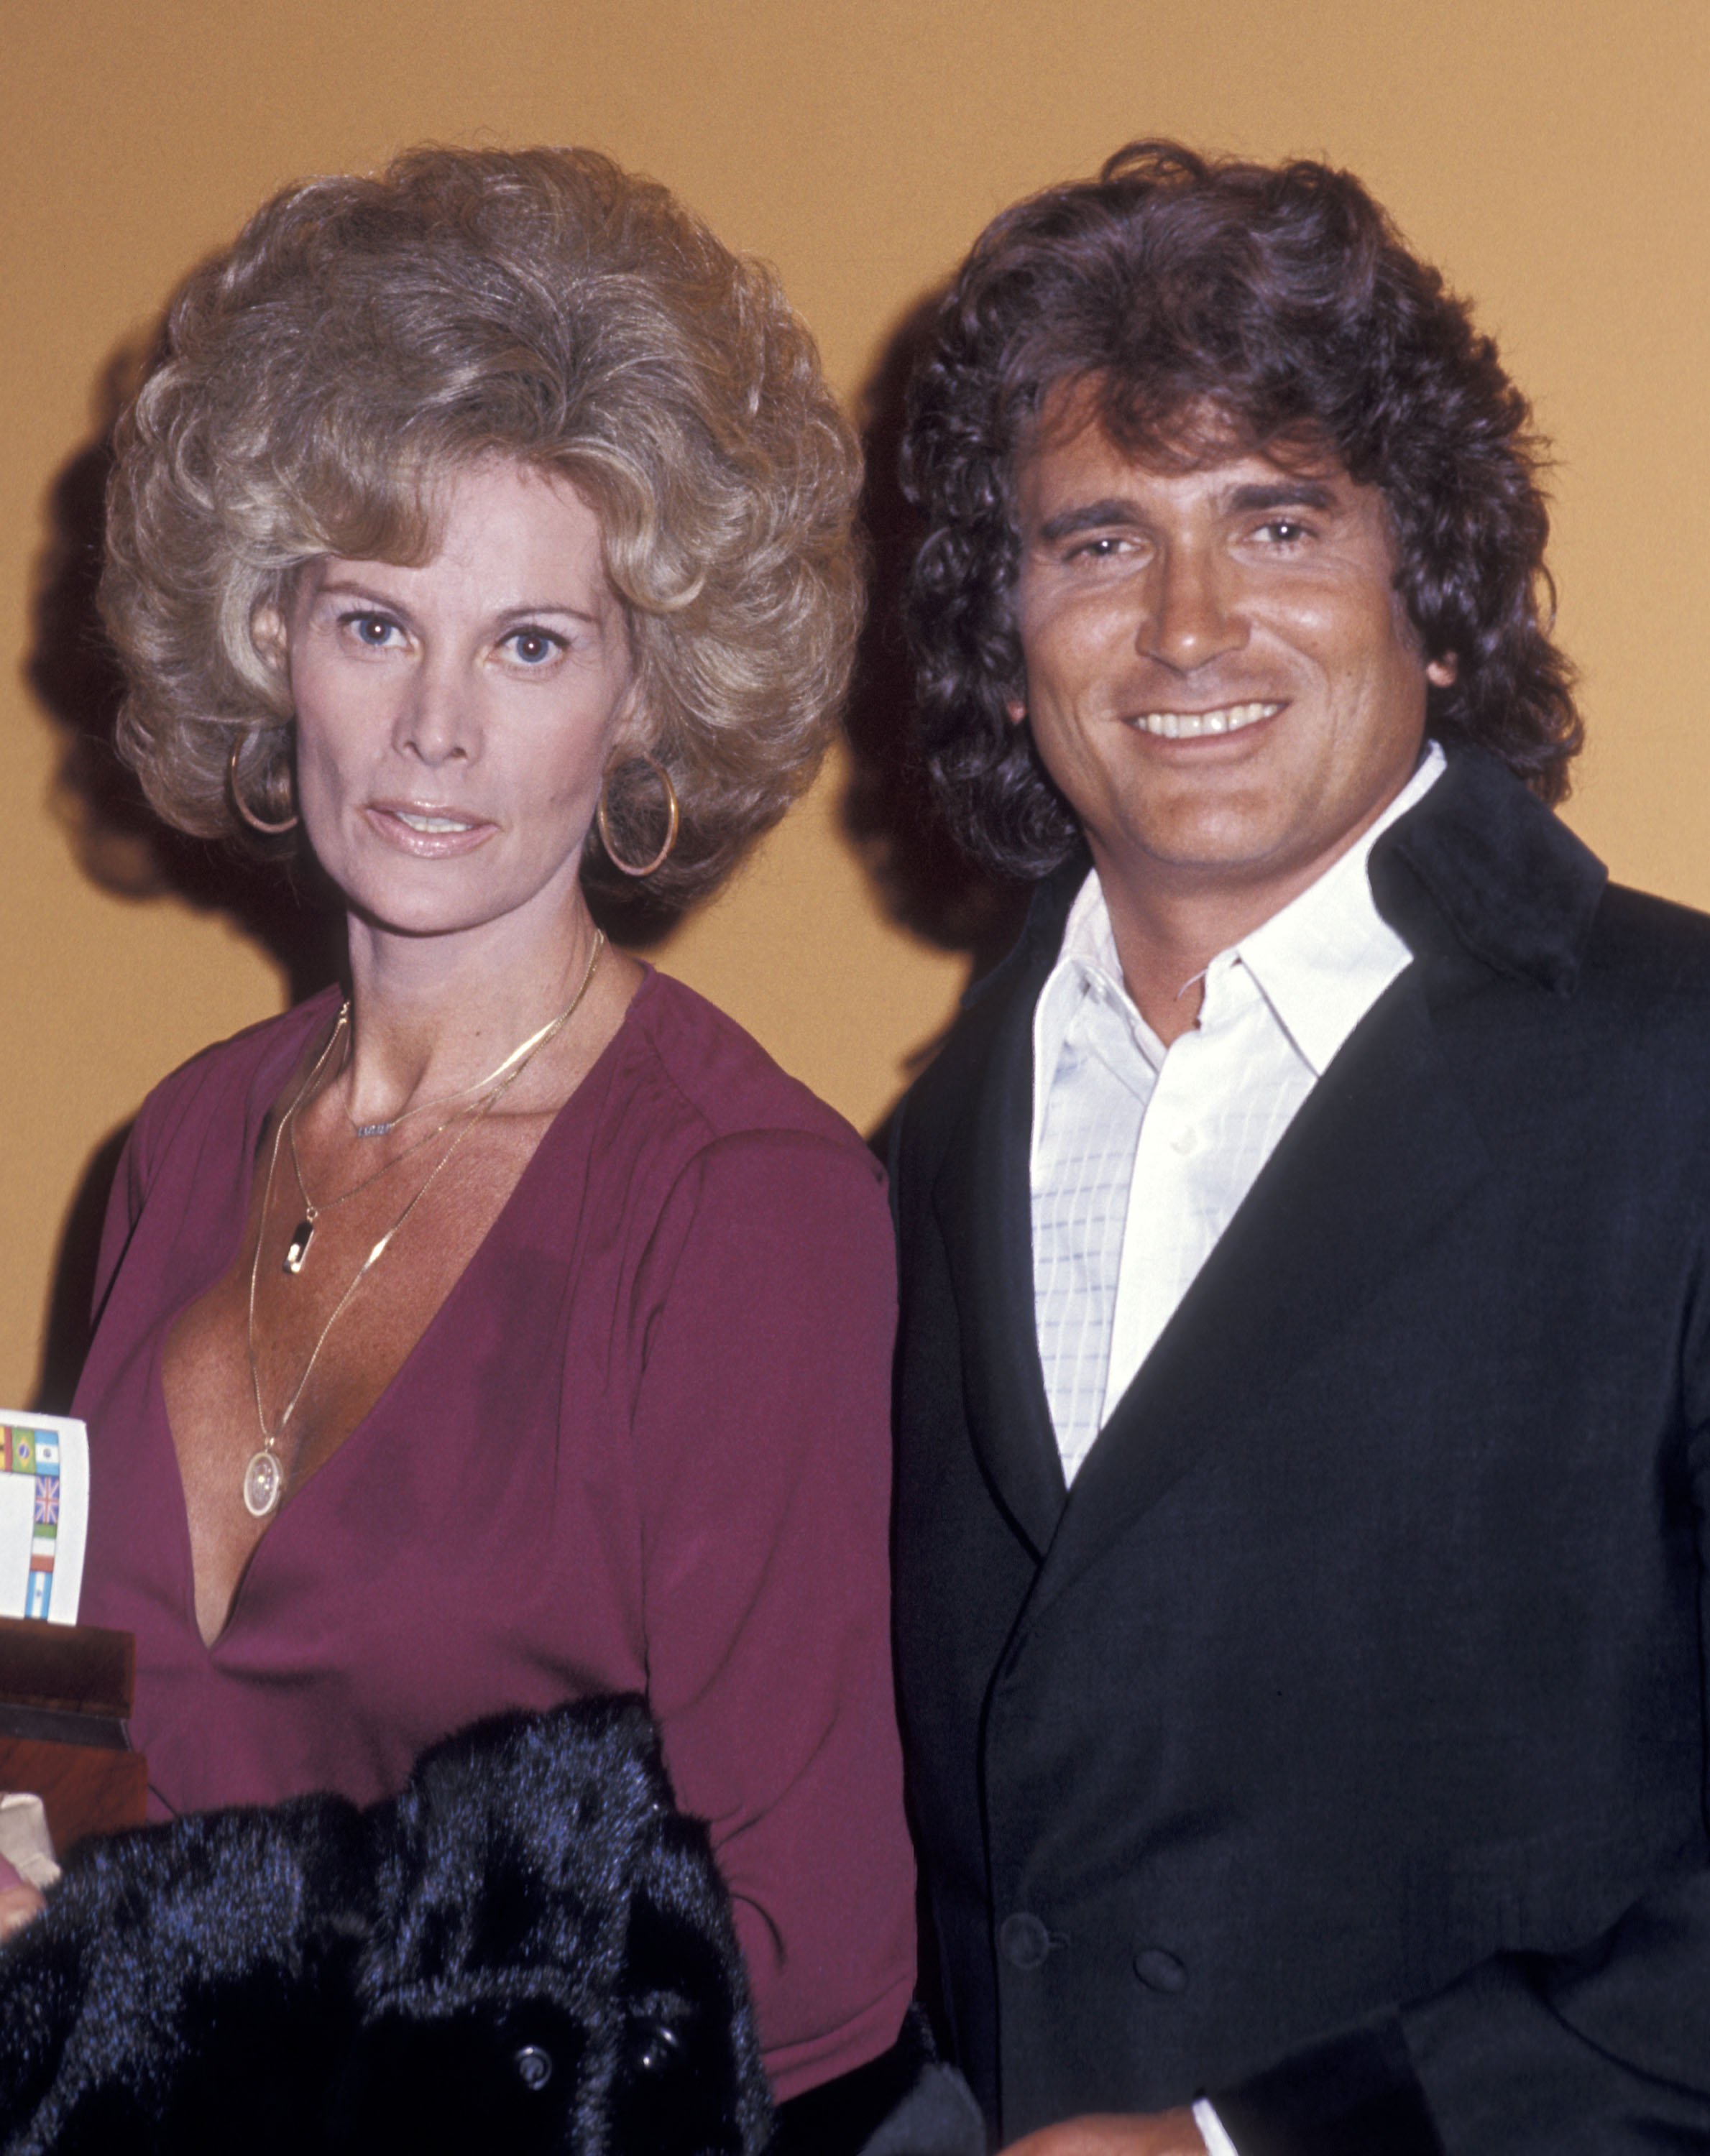 Actor Michael Landon and wife Lynn Noe attend the Hollywood Radio and Television Society's 16th Annual International Broadcasting Awards on March 4, 1976 at Century Plaza Hotel in Los Angeles, California.